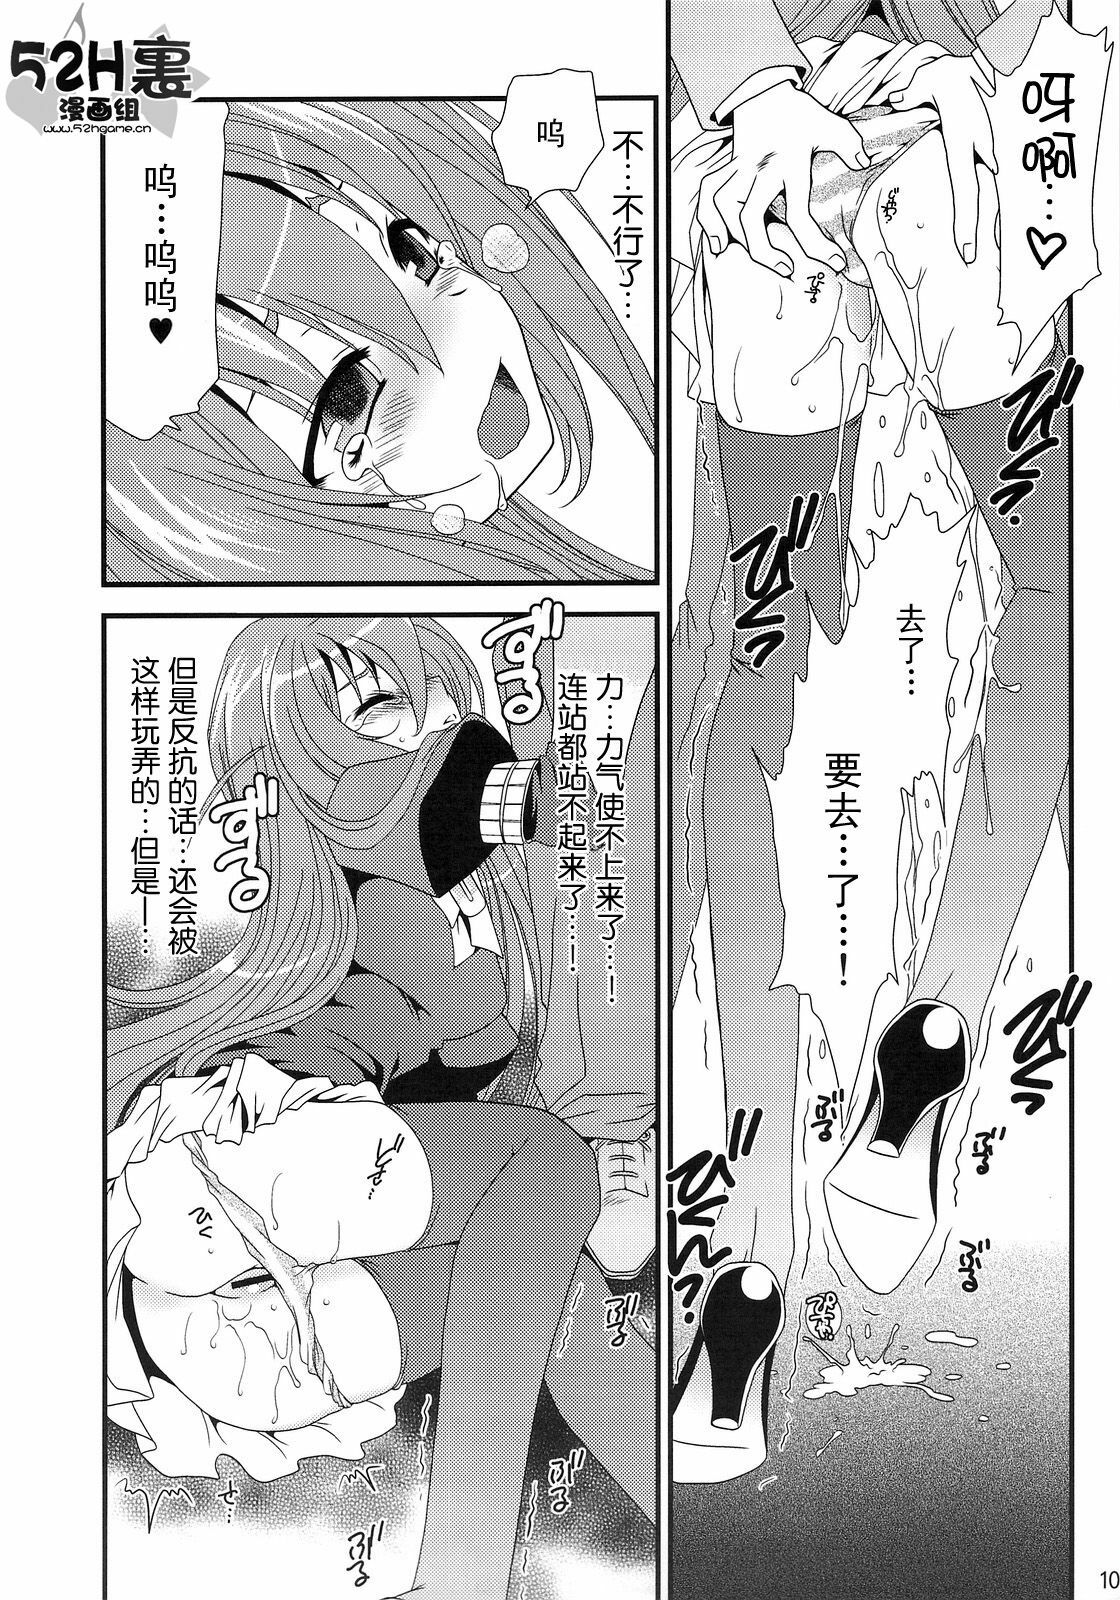 (C75) [Emode (Sanada Rin)] Kamijiru (The World God Only Knows) [Chinese] [52H里漫画组] page 9 full